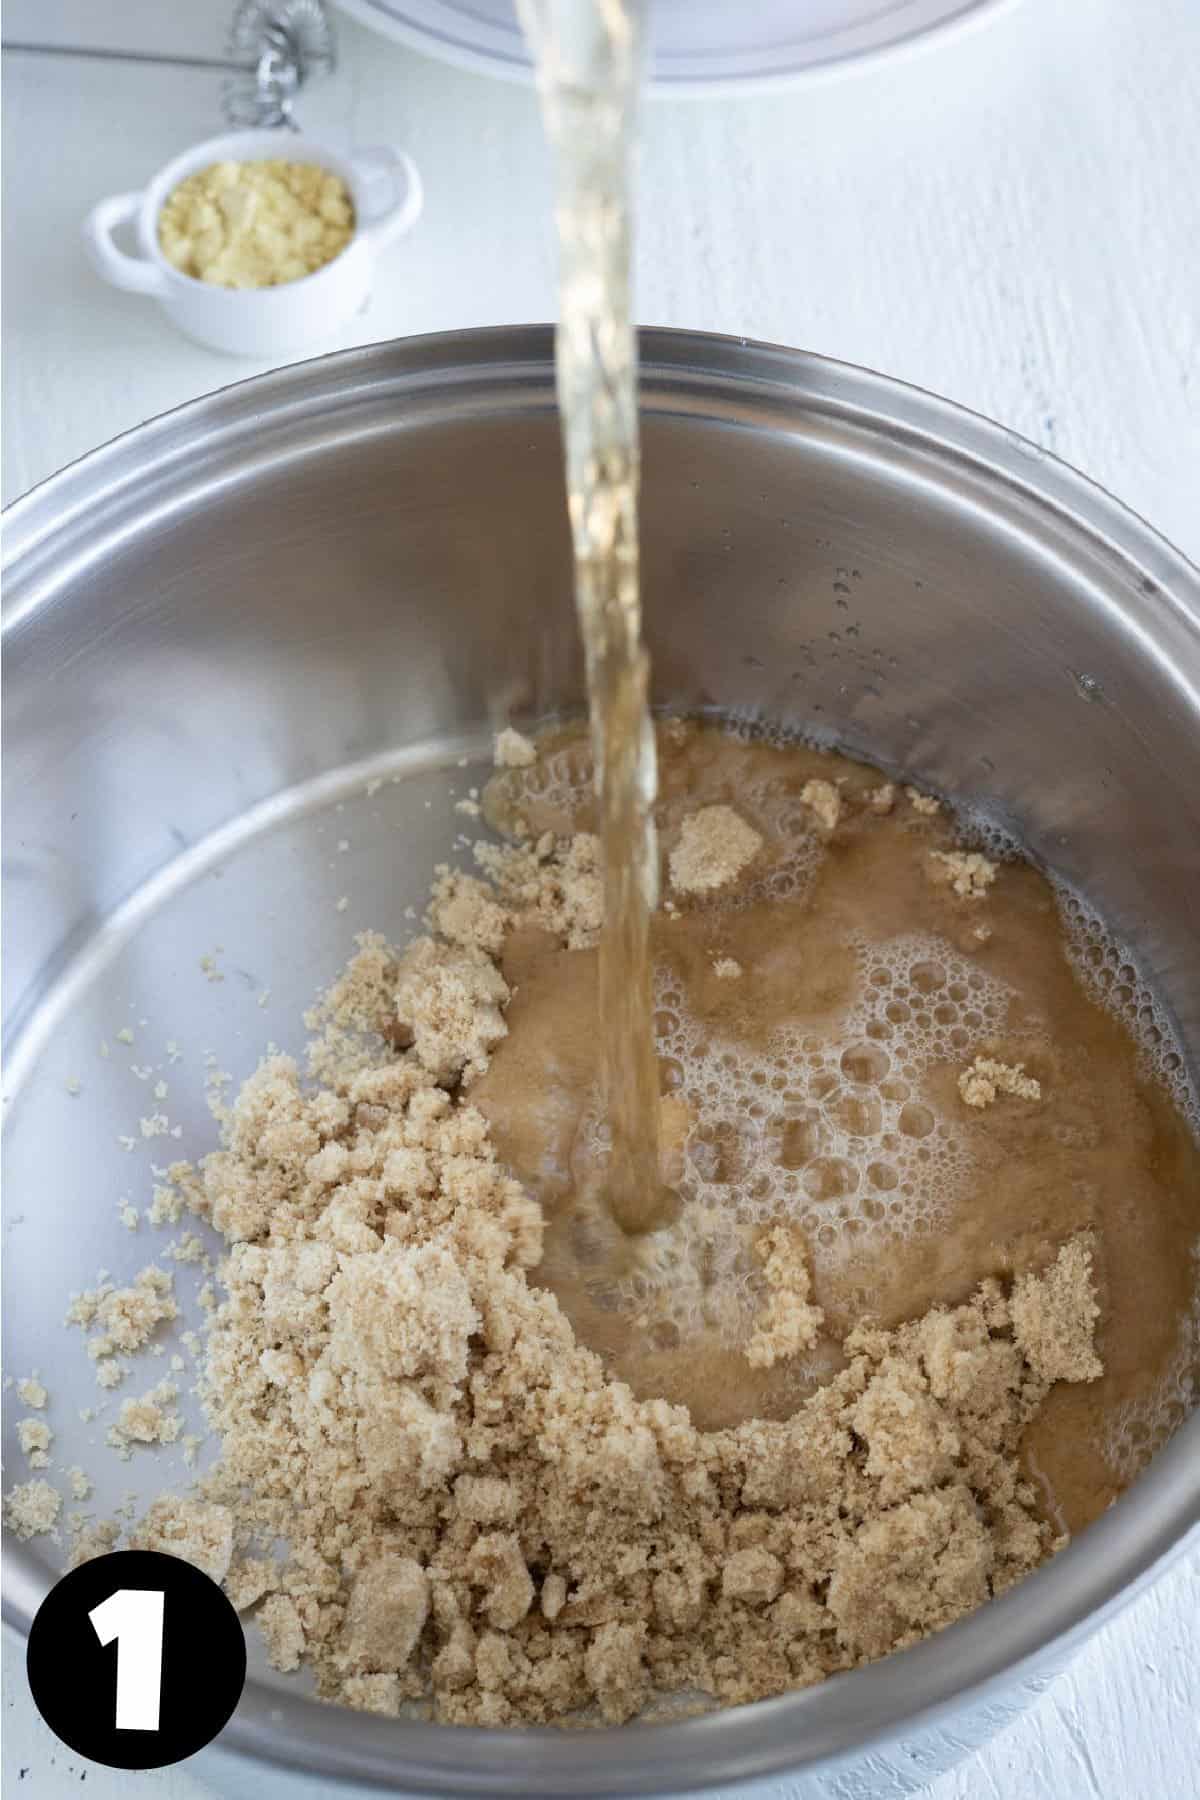 A pot with brown sugar and vinegar being poured in.